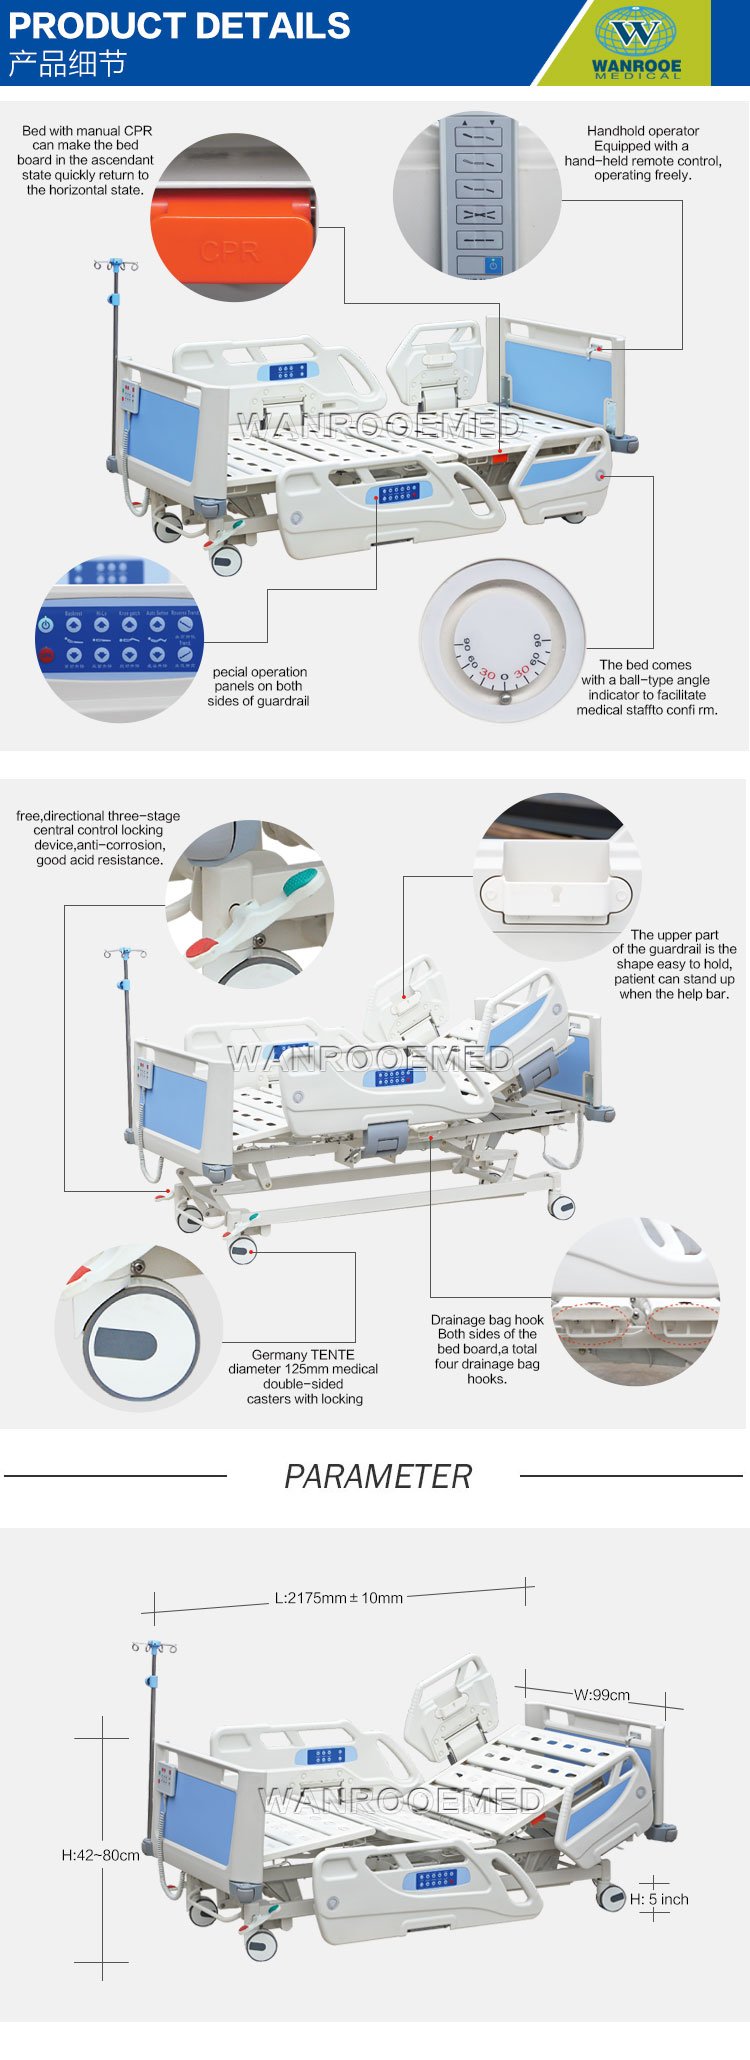 nursing bed,hospital bed,how to operate a hospital bed,medical bed,electric medical bed